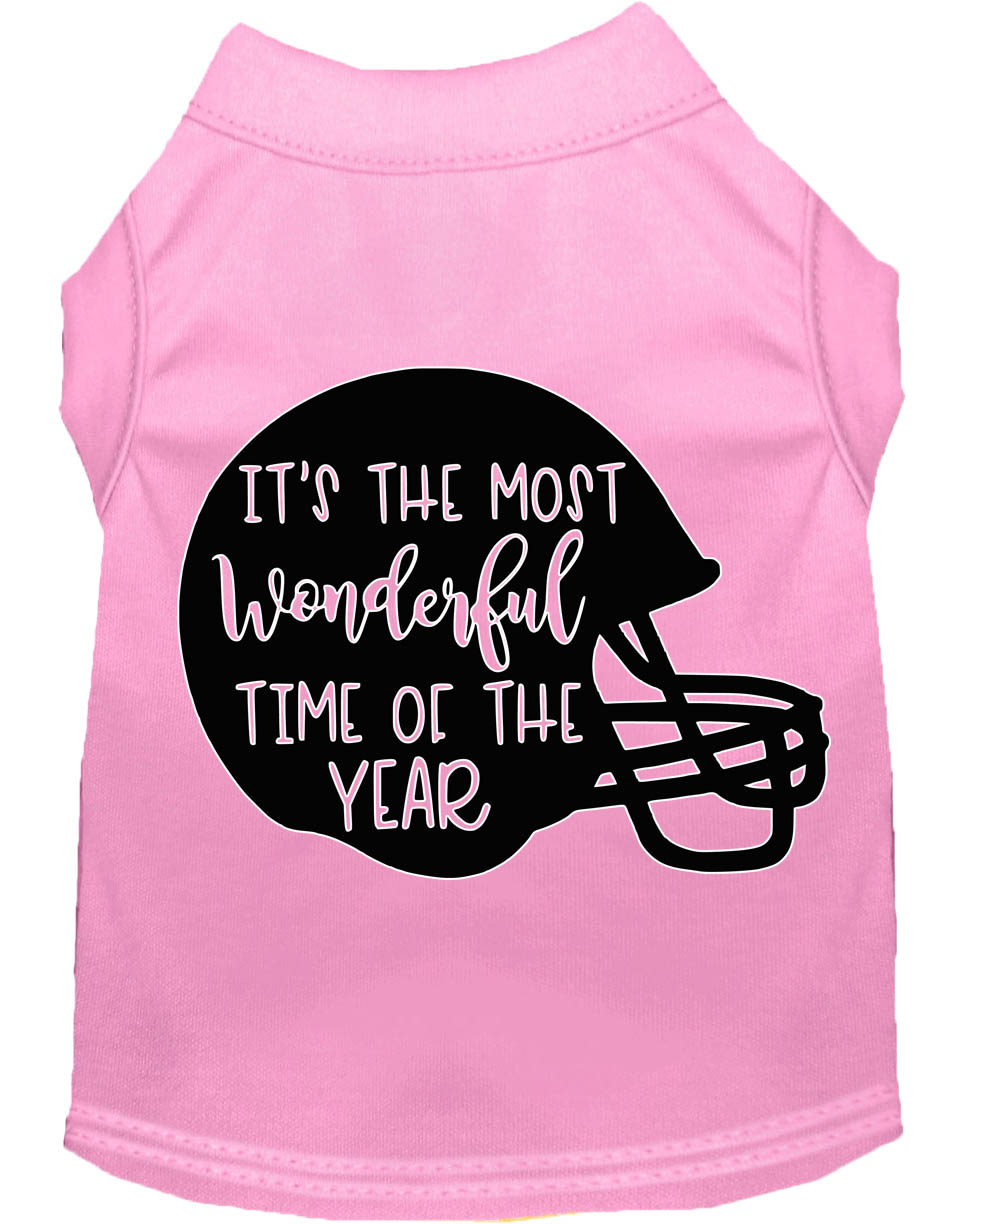 Most Wonderful Time of the Year (Football) Screen Print Dog Shirt Light Pink XS